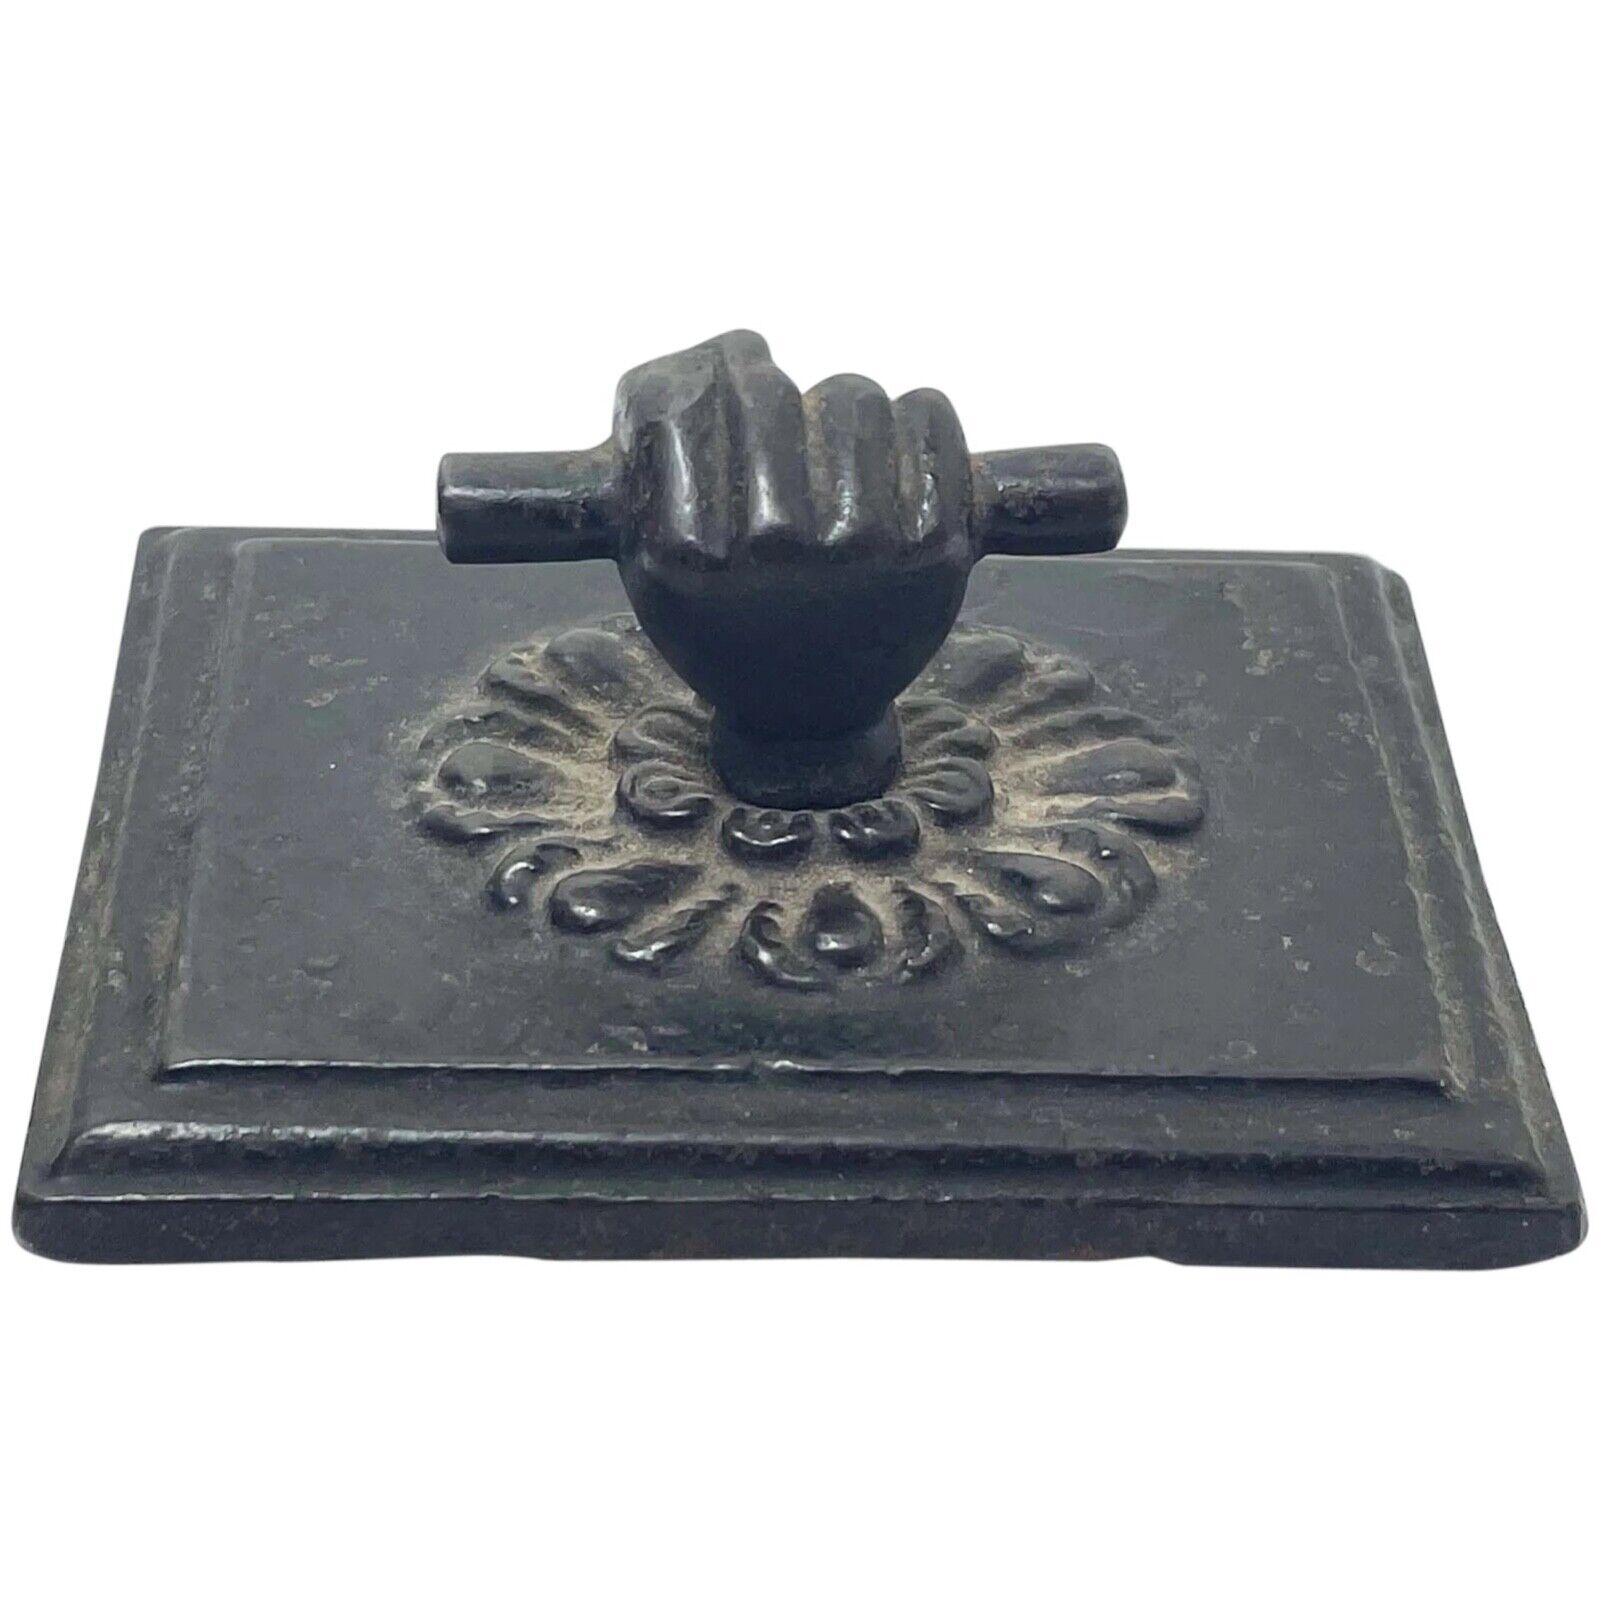 Collectible Small Early Victorian Fist Finial Cast Iron Paperweight